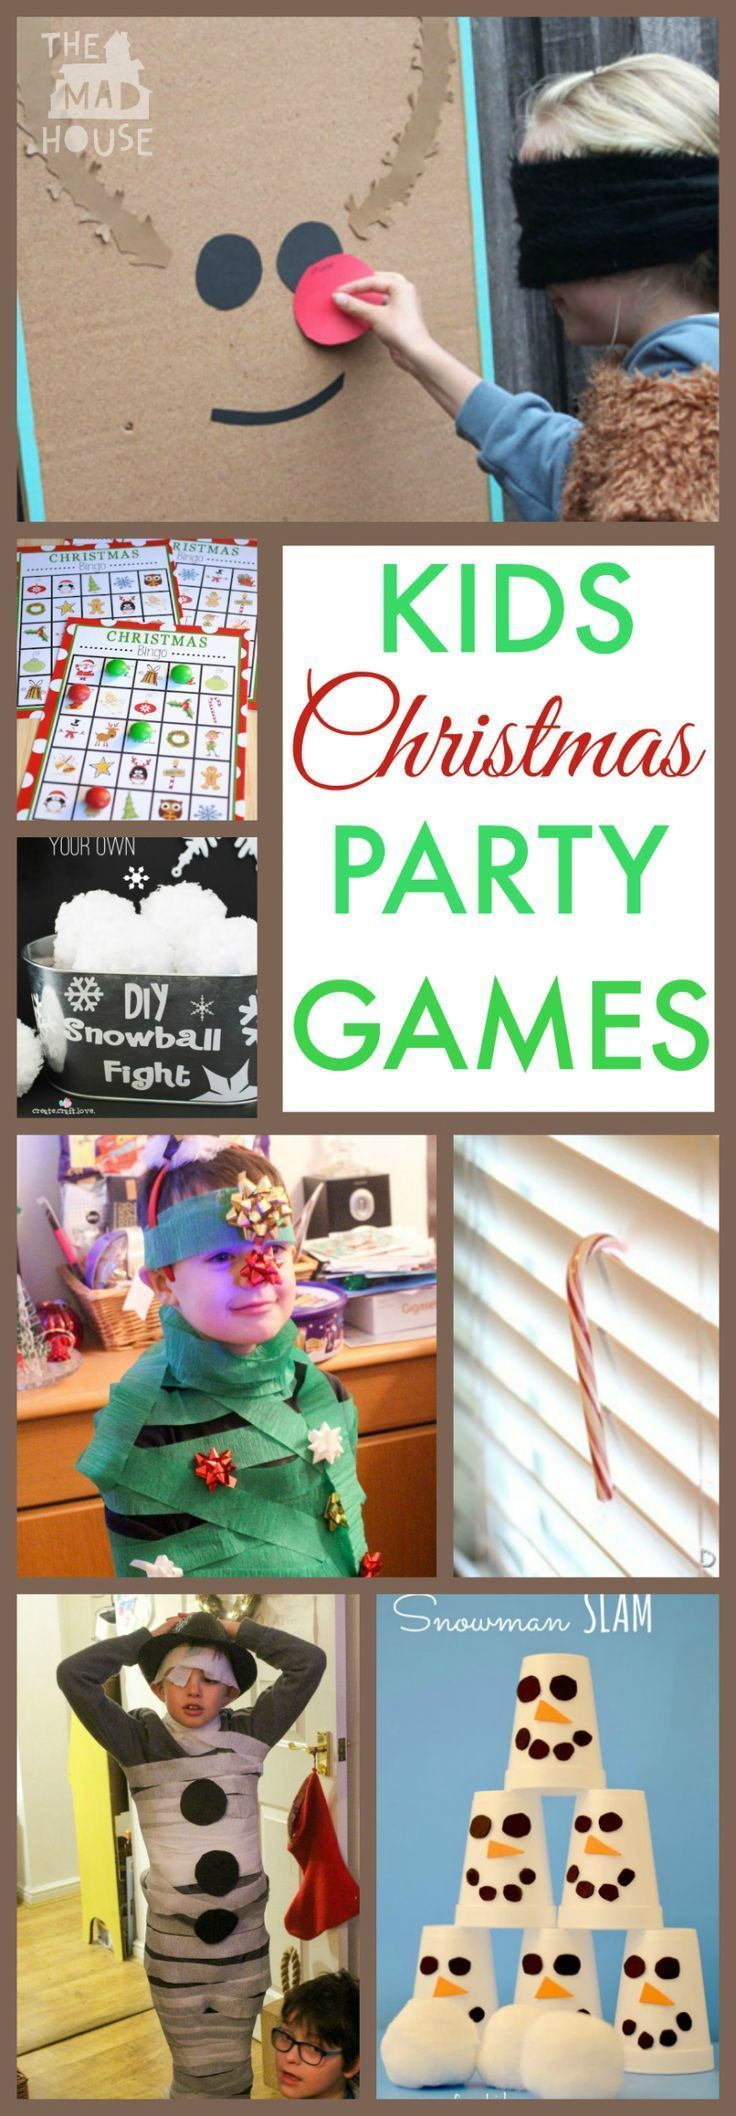 Christmas Party Ideas For Large Groups
 Christmas Party Games